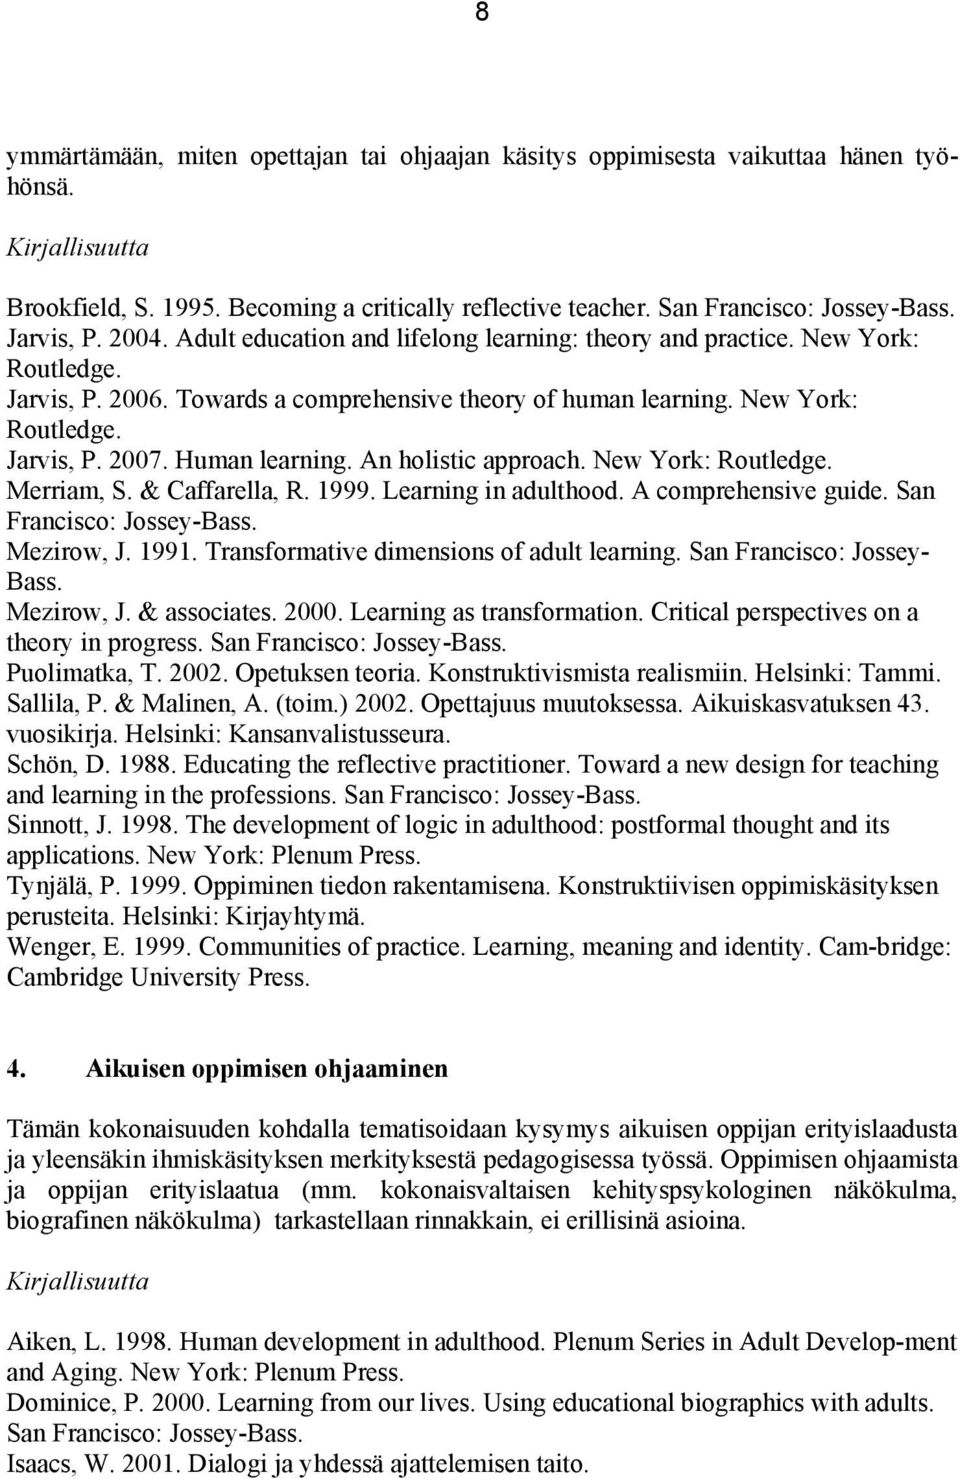 Human learning. An holistic approach. New York: Routledge. Merriam, S. & Caffarella, R. 1999. Learning in adulthood. A comprehensive guide. San Francisco: Jossey-Bass. Mezirow, J. 1991.